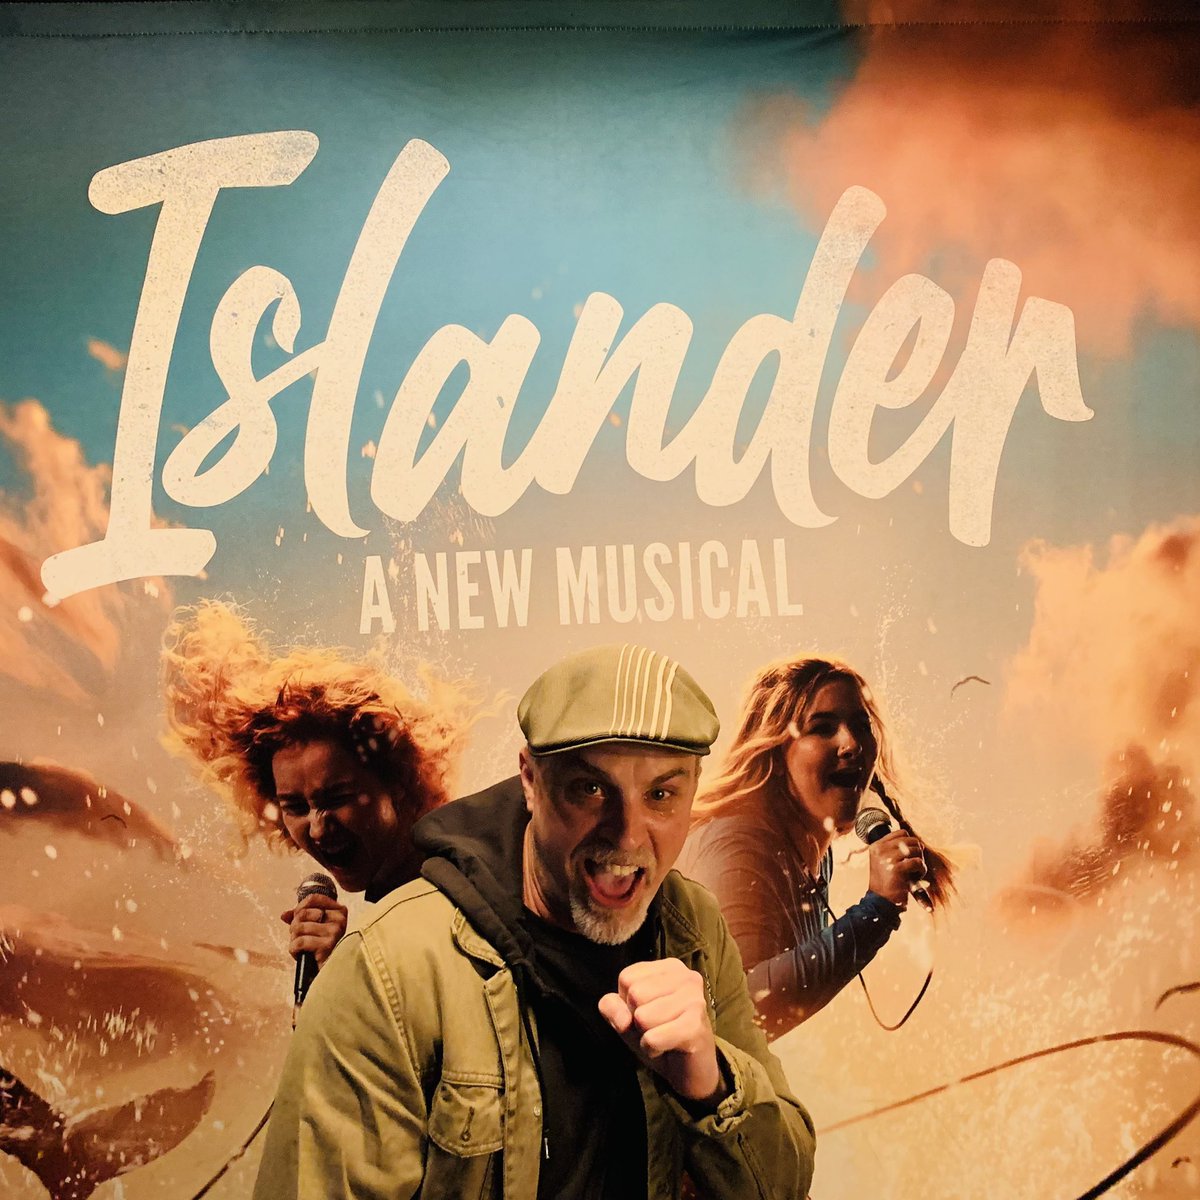 Loved this show so so so much. @IslanderMusical